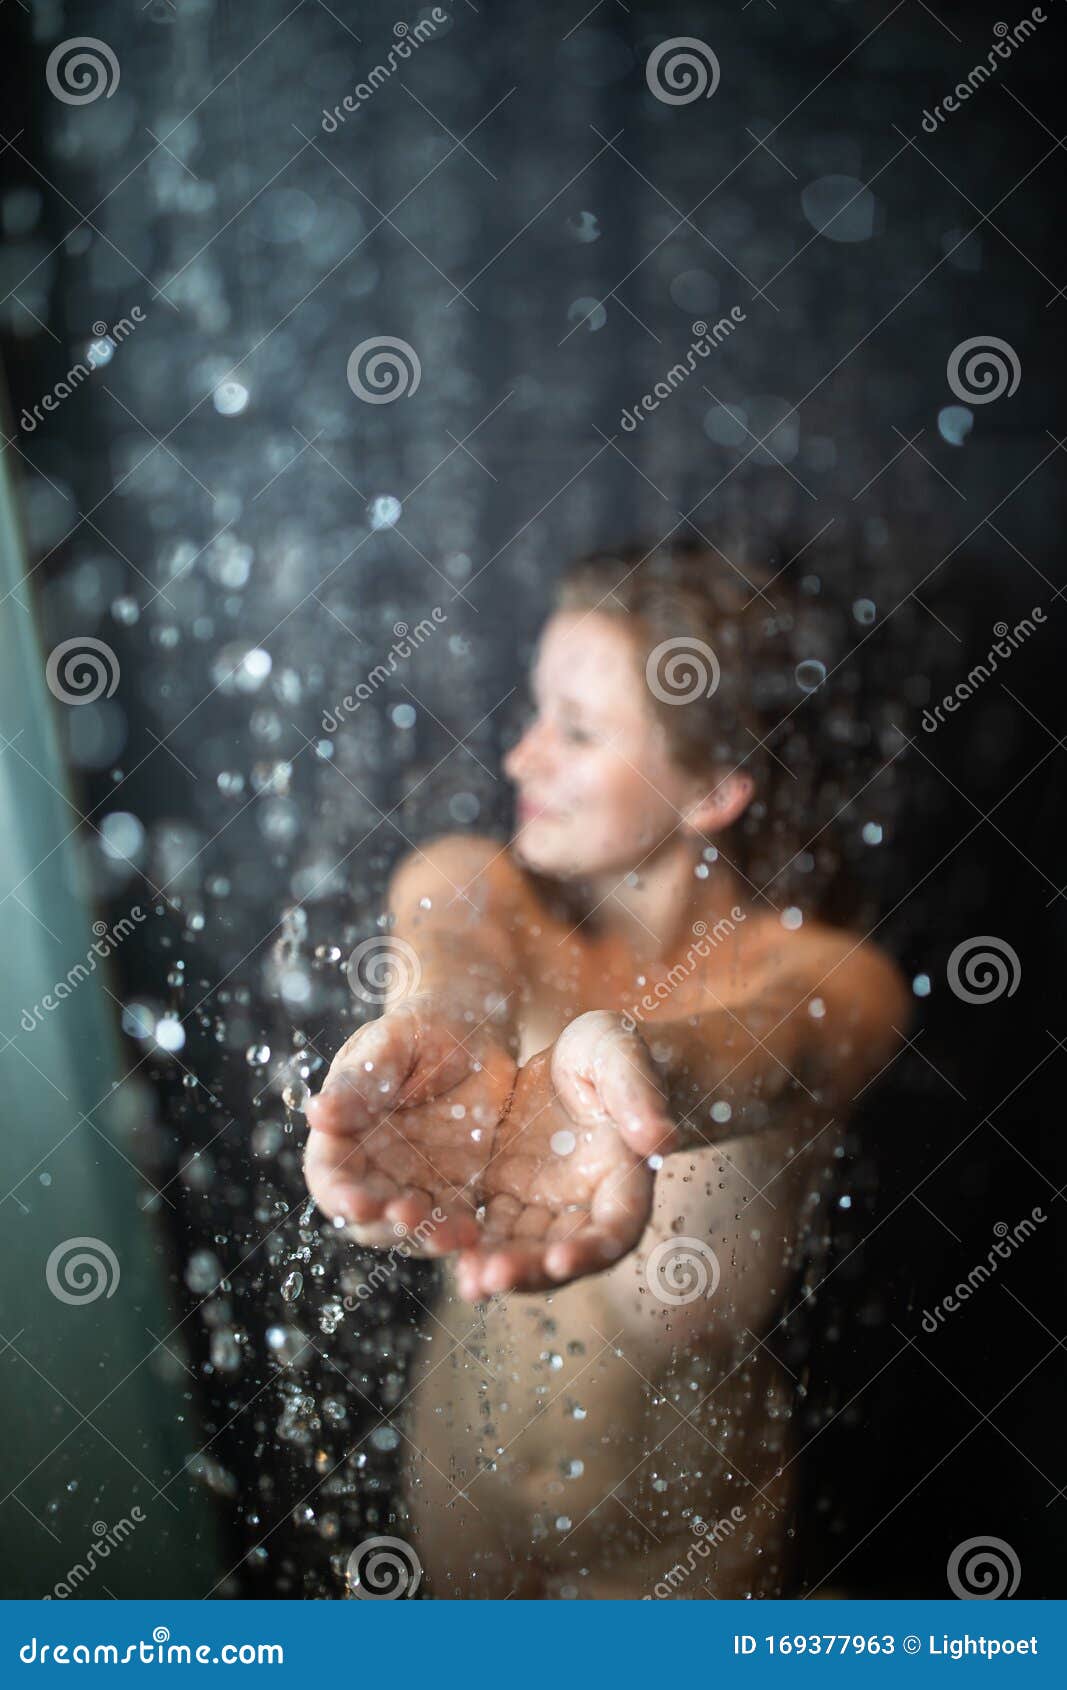 cindy beherns recommends hot women taking shower pic